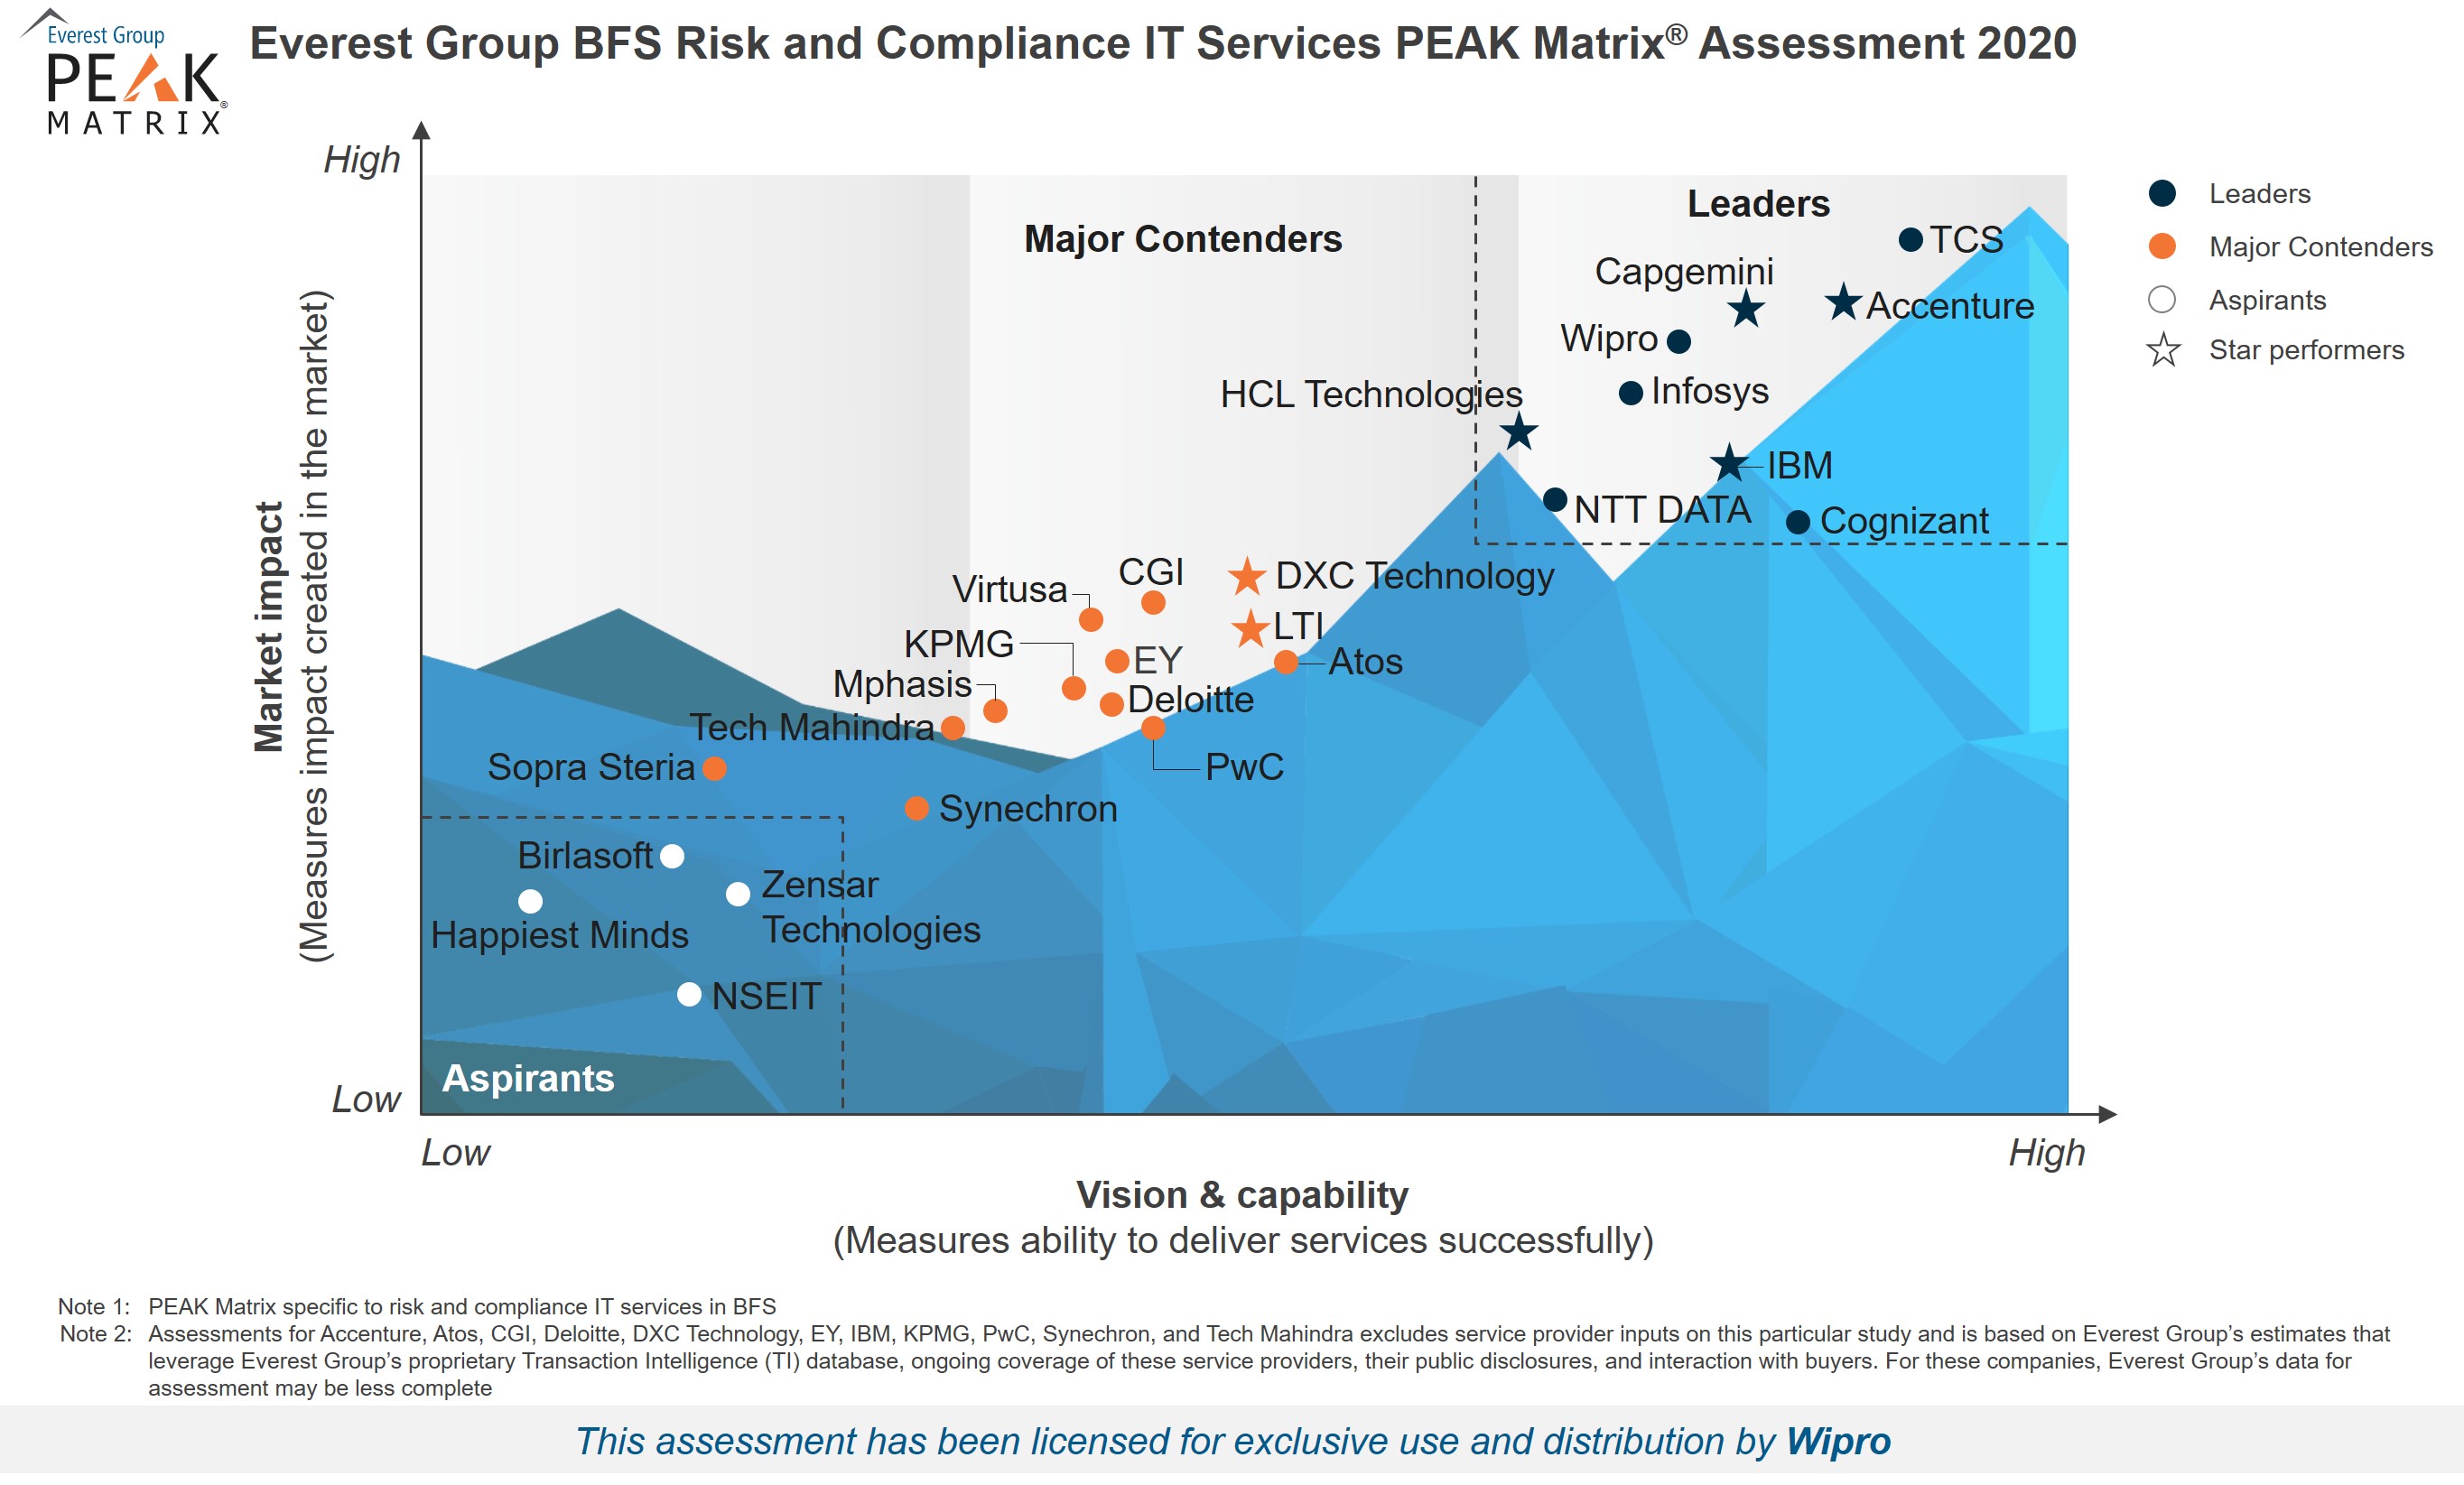 Wipro positioned as a Leader in BFS Risk and Compliance IT Services PEAK Matrix Assessment 2020